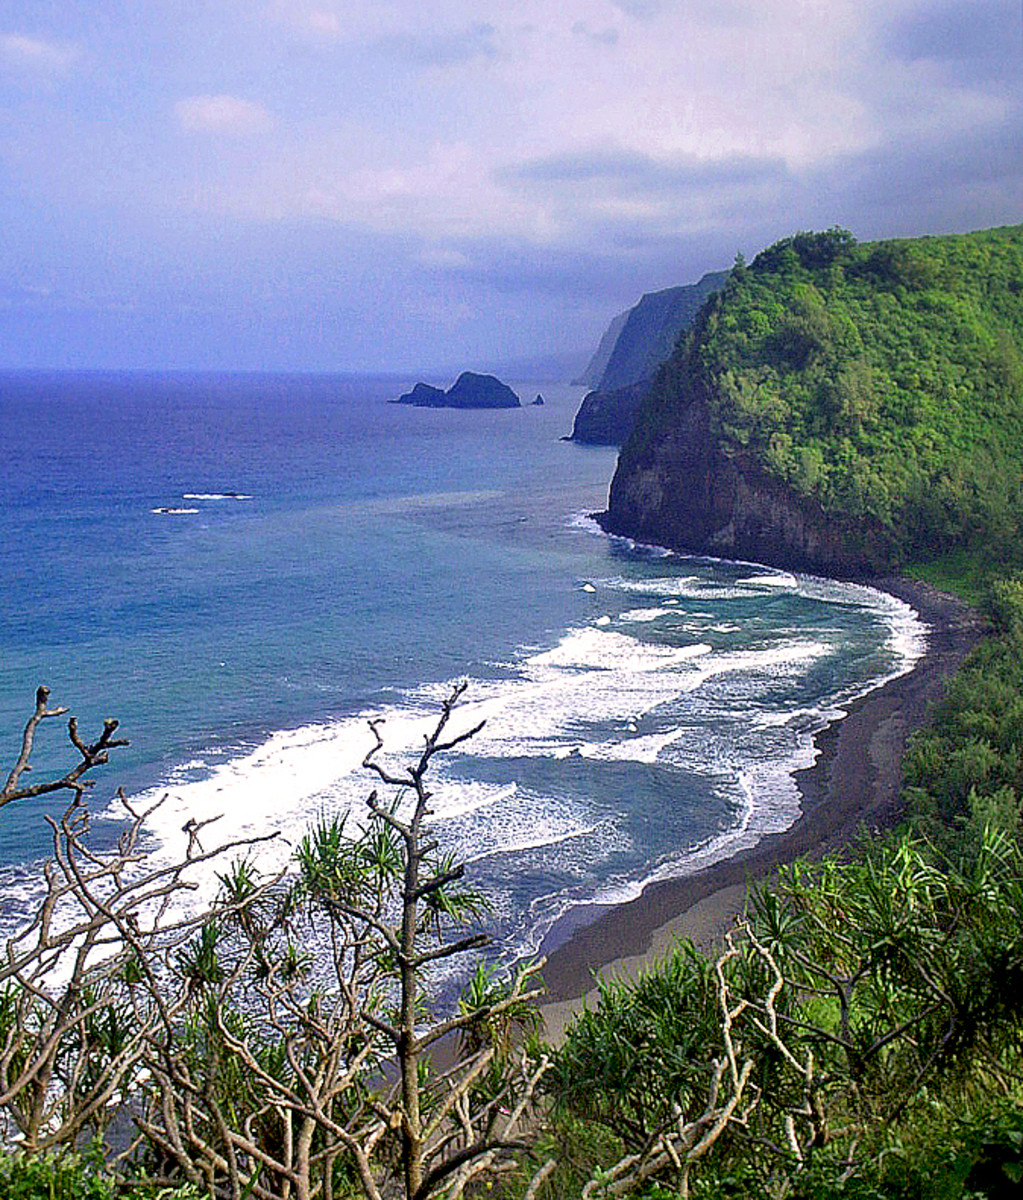 Pololu Valley Lookout with its dramatic edge-of-the-world views.